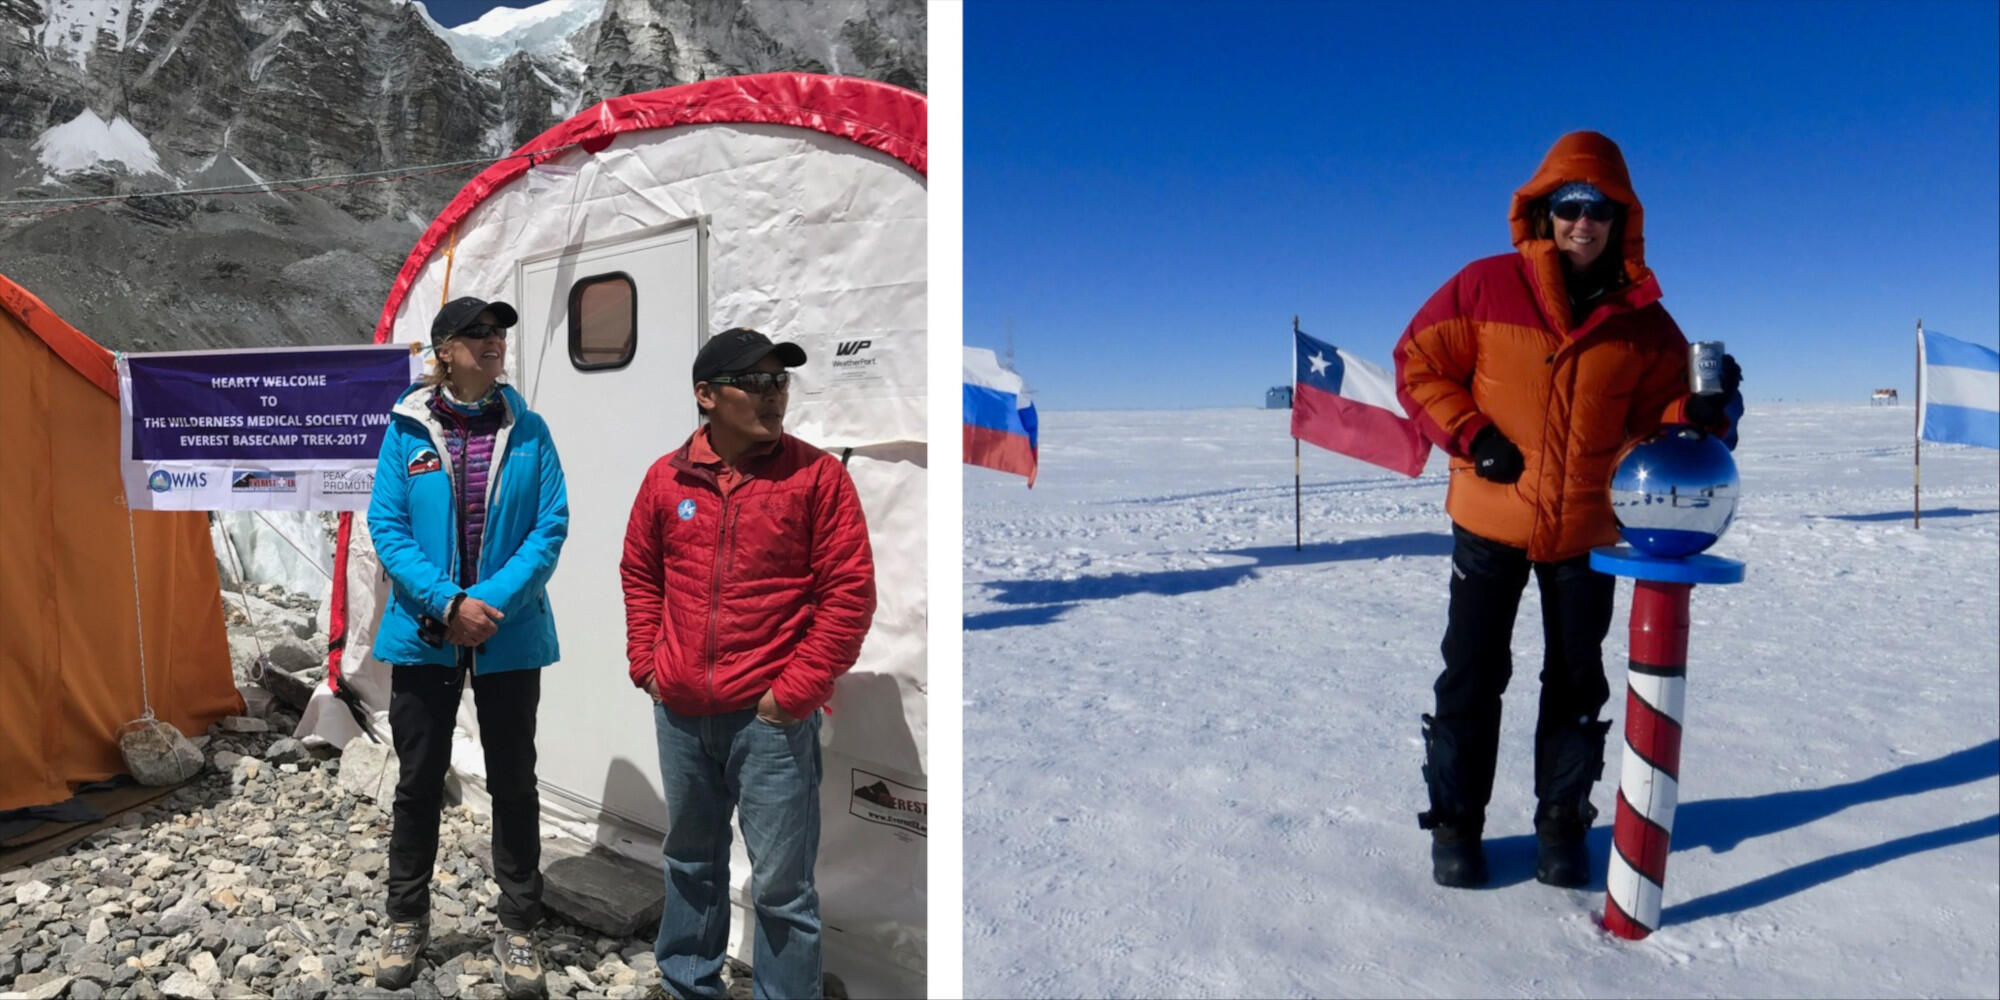 On the left is a photo of a woman and a man standing outside of a tend at the side of a mountain. ON the right is a photo of a woman at a red and white striped pole in the snow. Behind her are flags for different countries. 